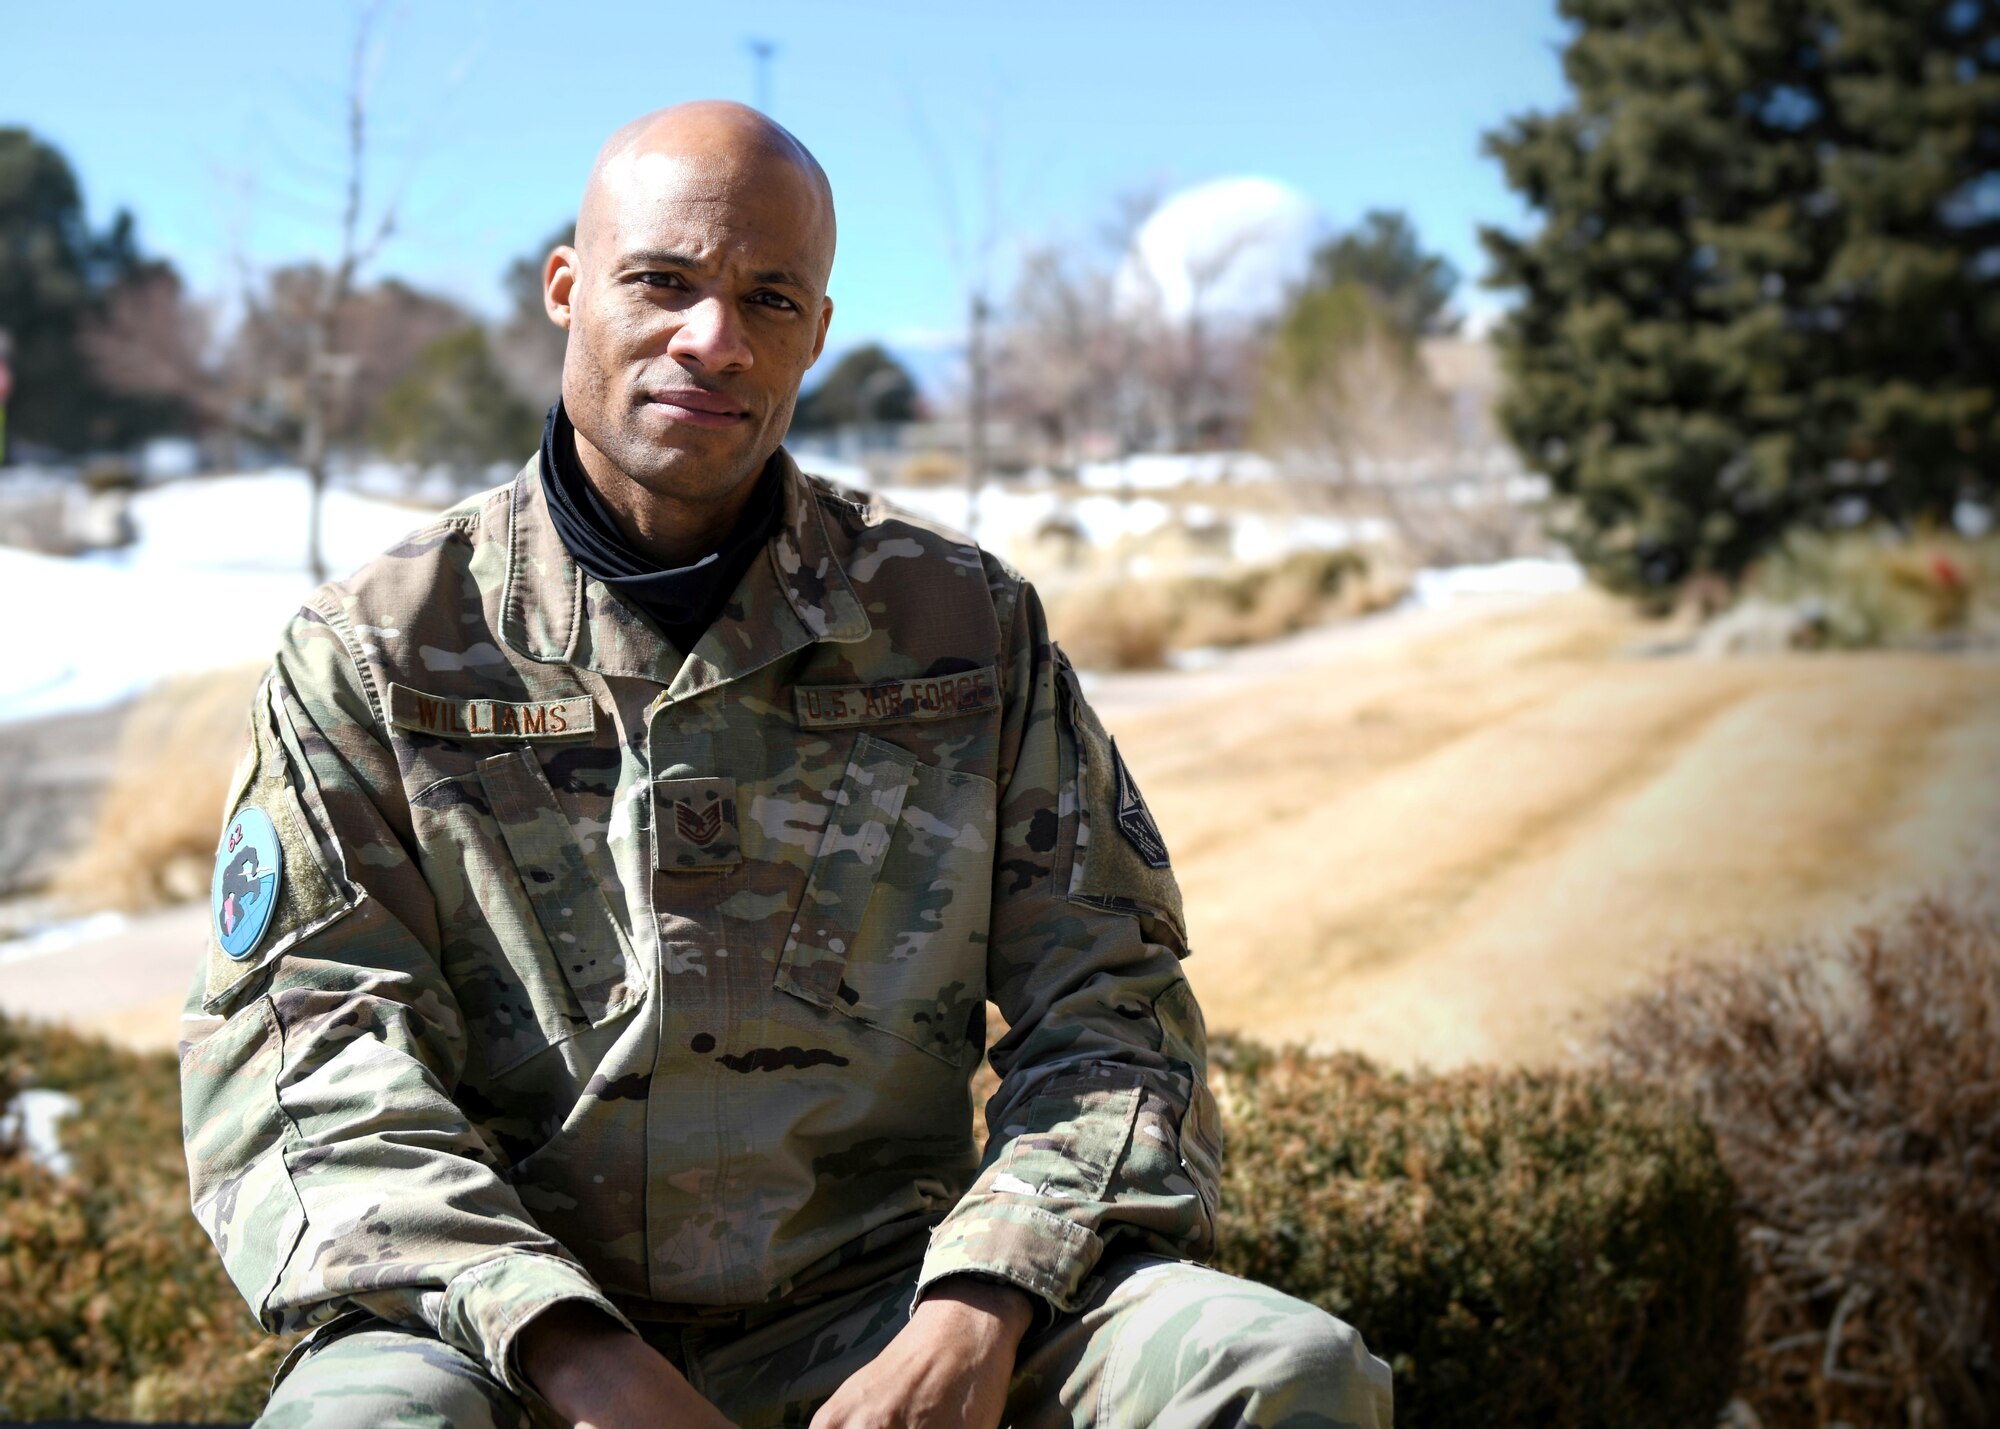 Tech. Sgt Terry Williams, the 62d Cyberspace Squadron NCO in charge of Cyber Integration, poses for a photo at Buckley Air Force Base, Colo., March 1, 2021.